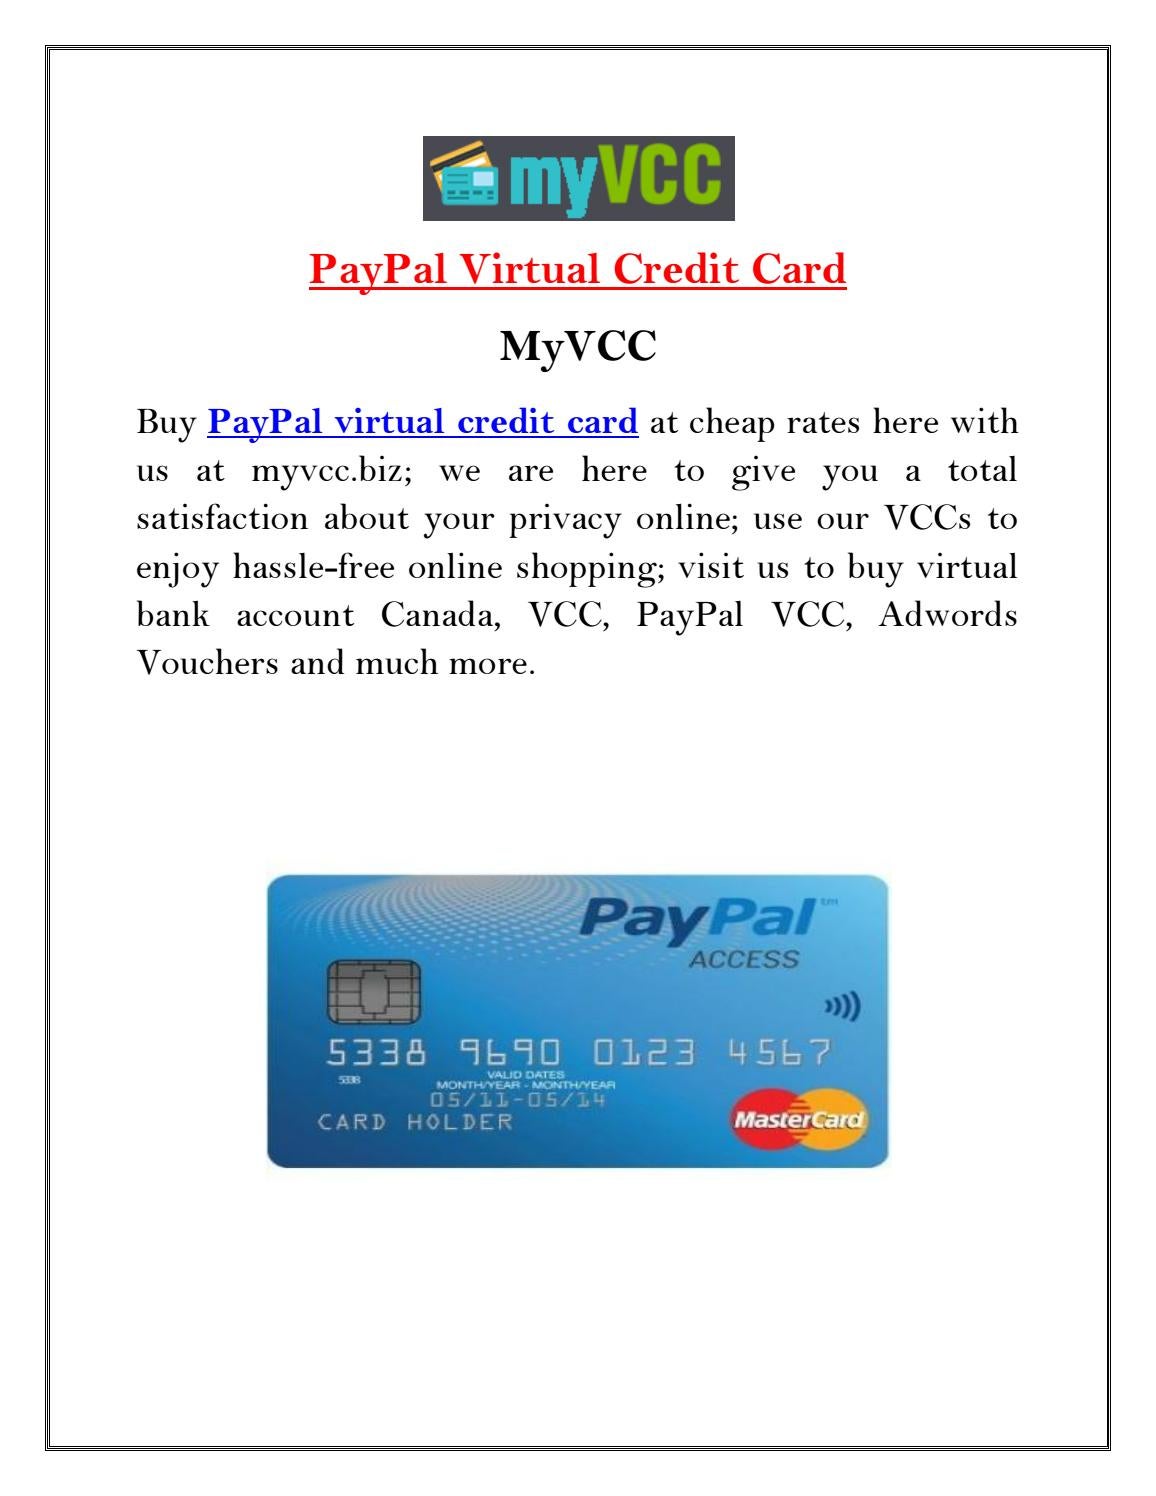 PayPal vcc cards - PayPal Community